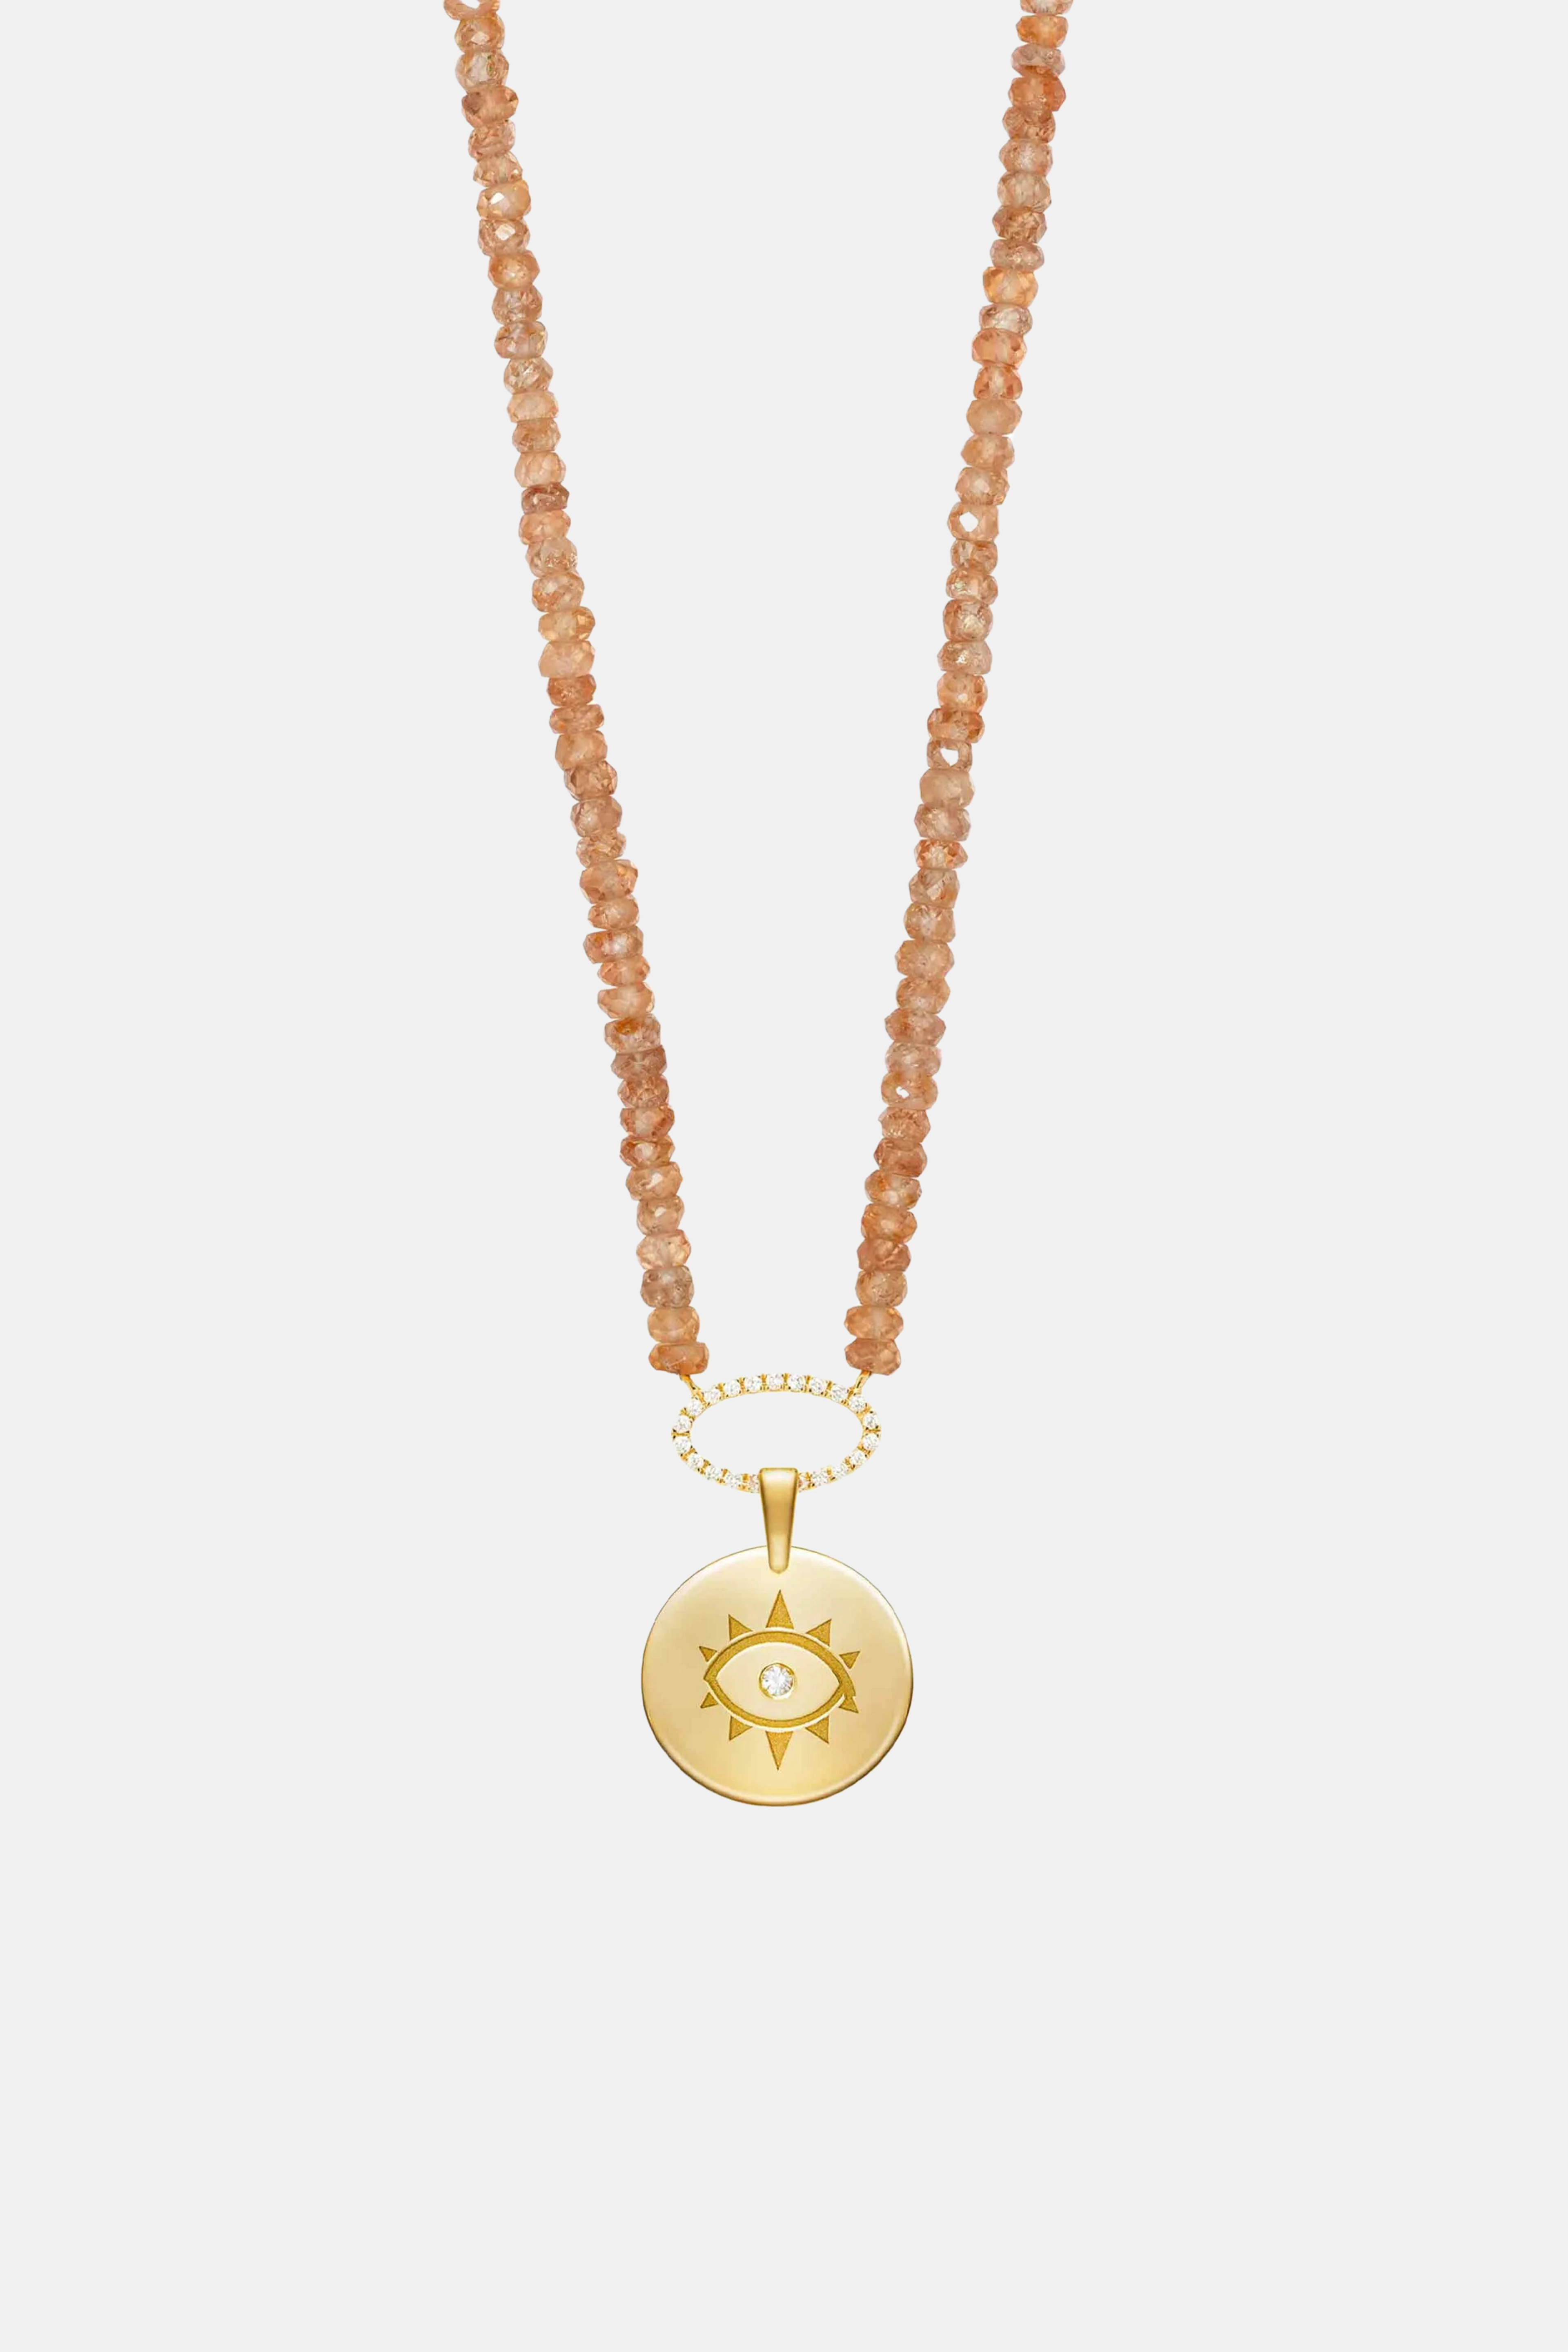 Zircom Apricot Beaded Necklace With Coin Evil Eye Pendant